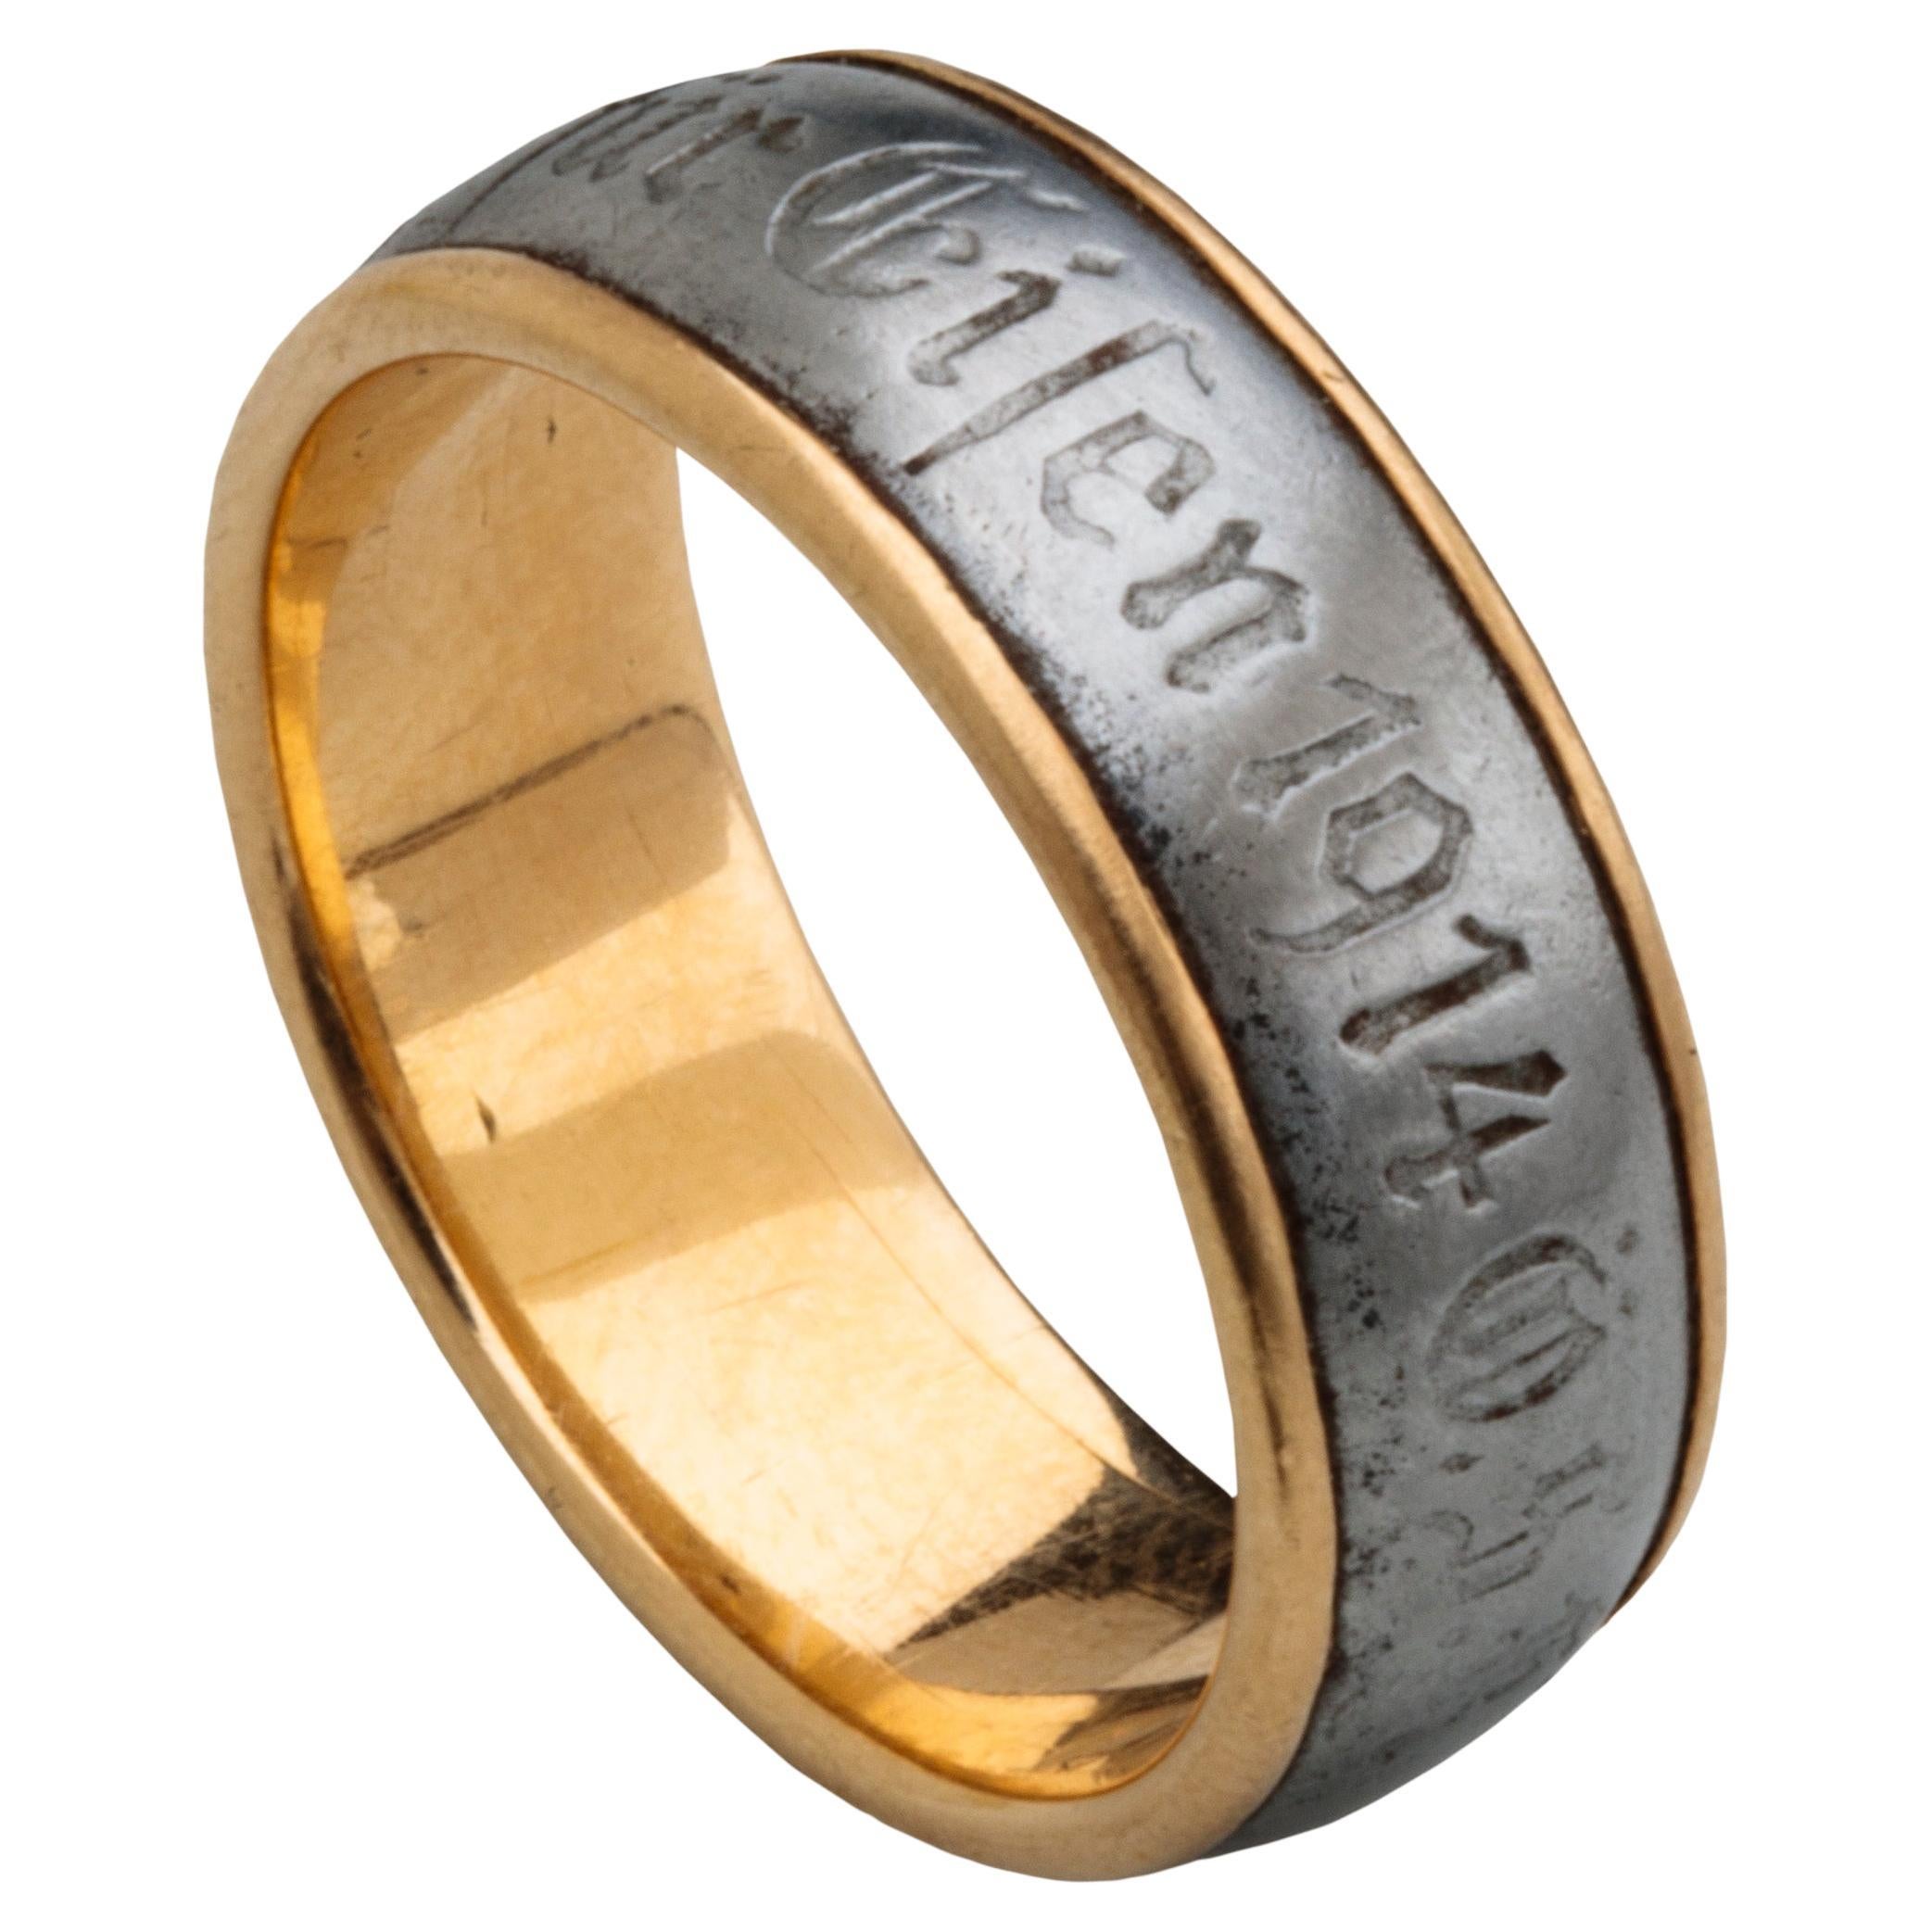 Inscribed Patriotic Ring from the First World War For Sale